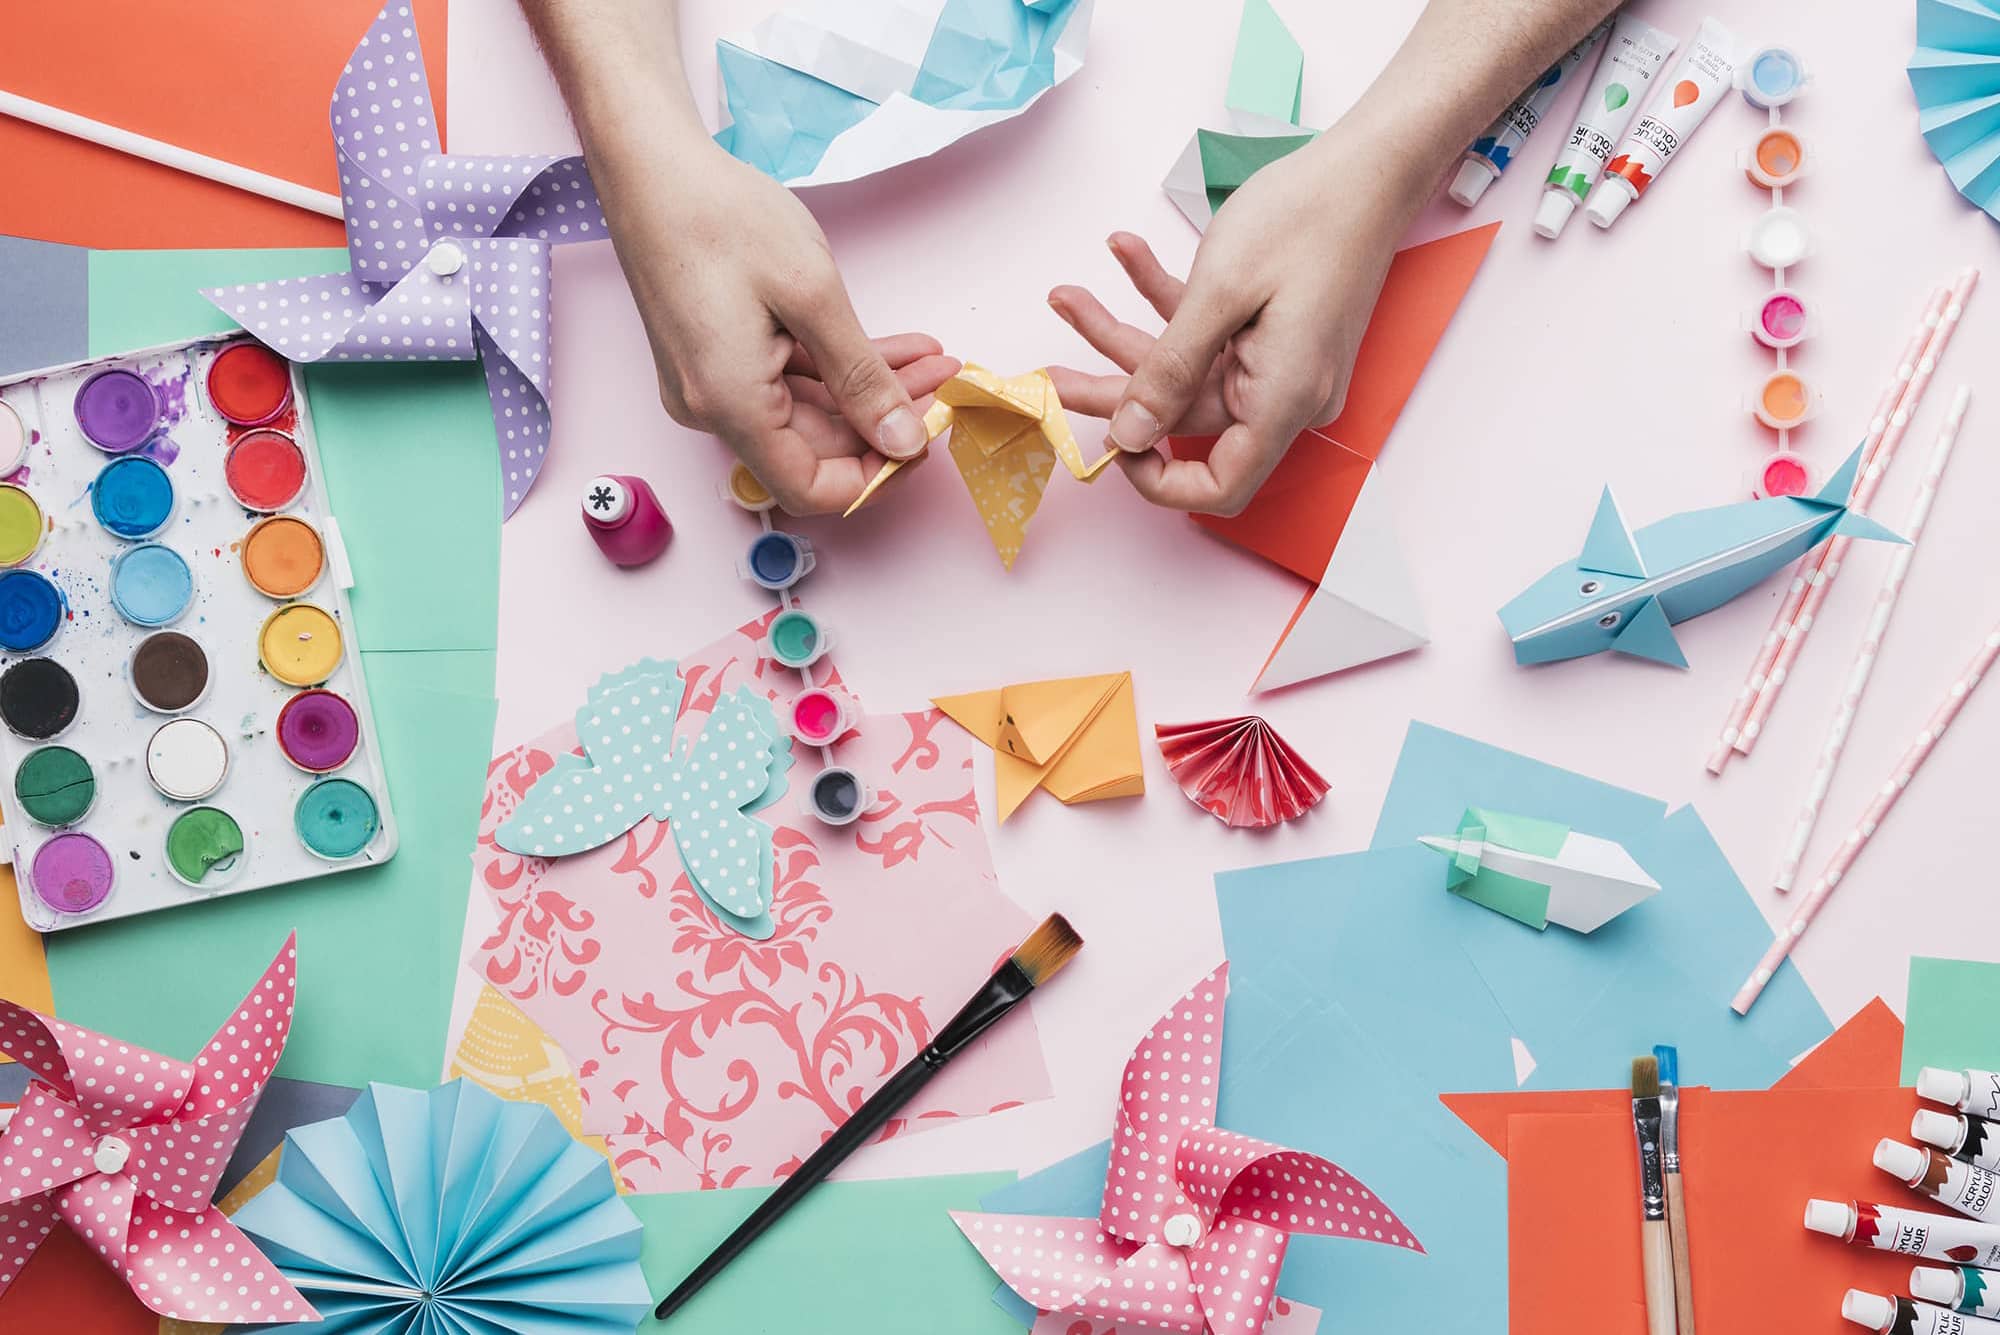 human-hand-holding-origami-bird-over-craft-product (1)